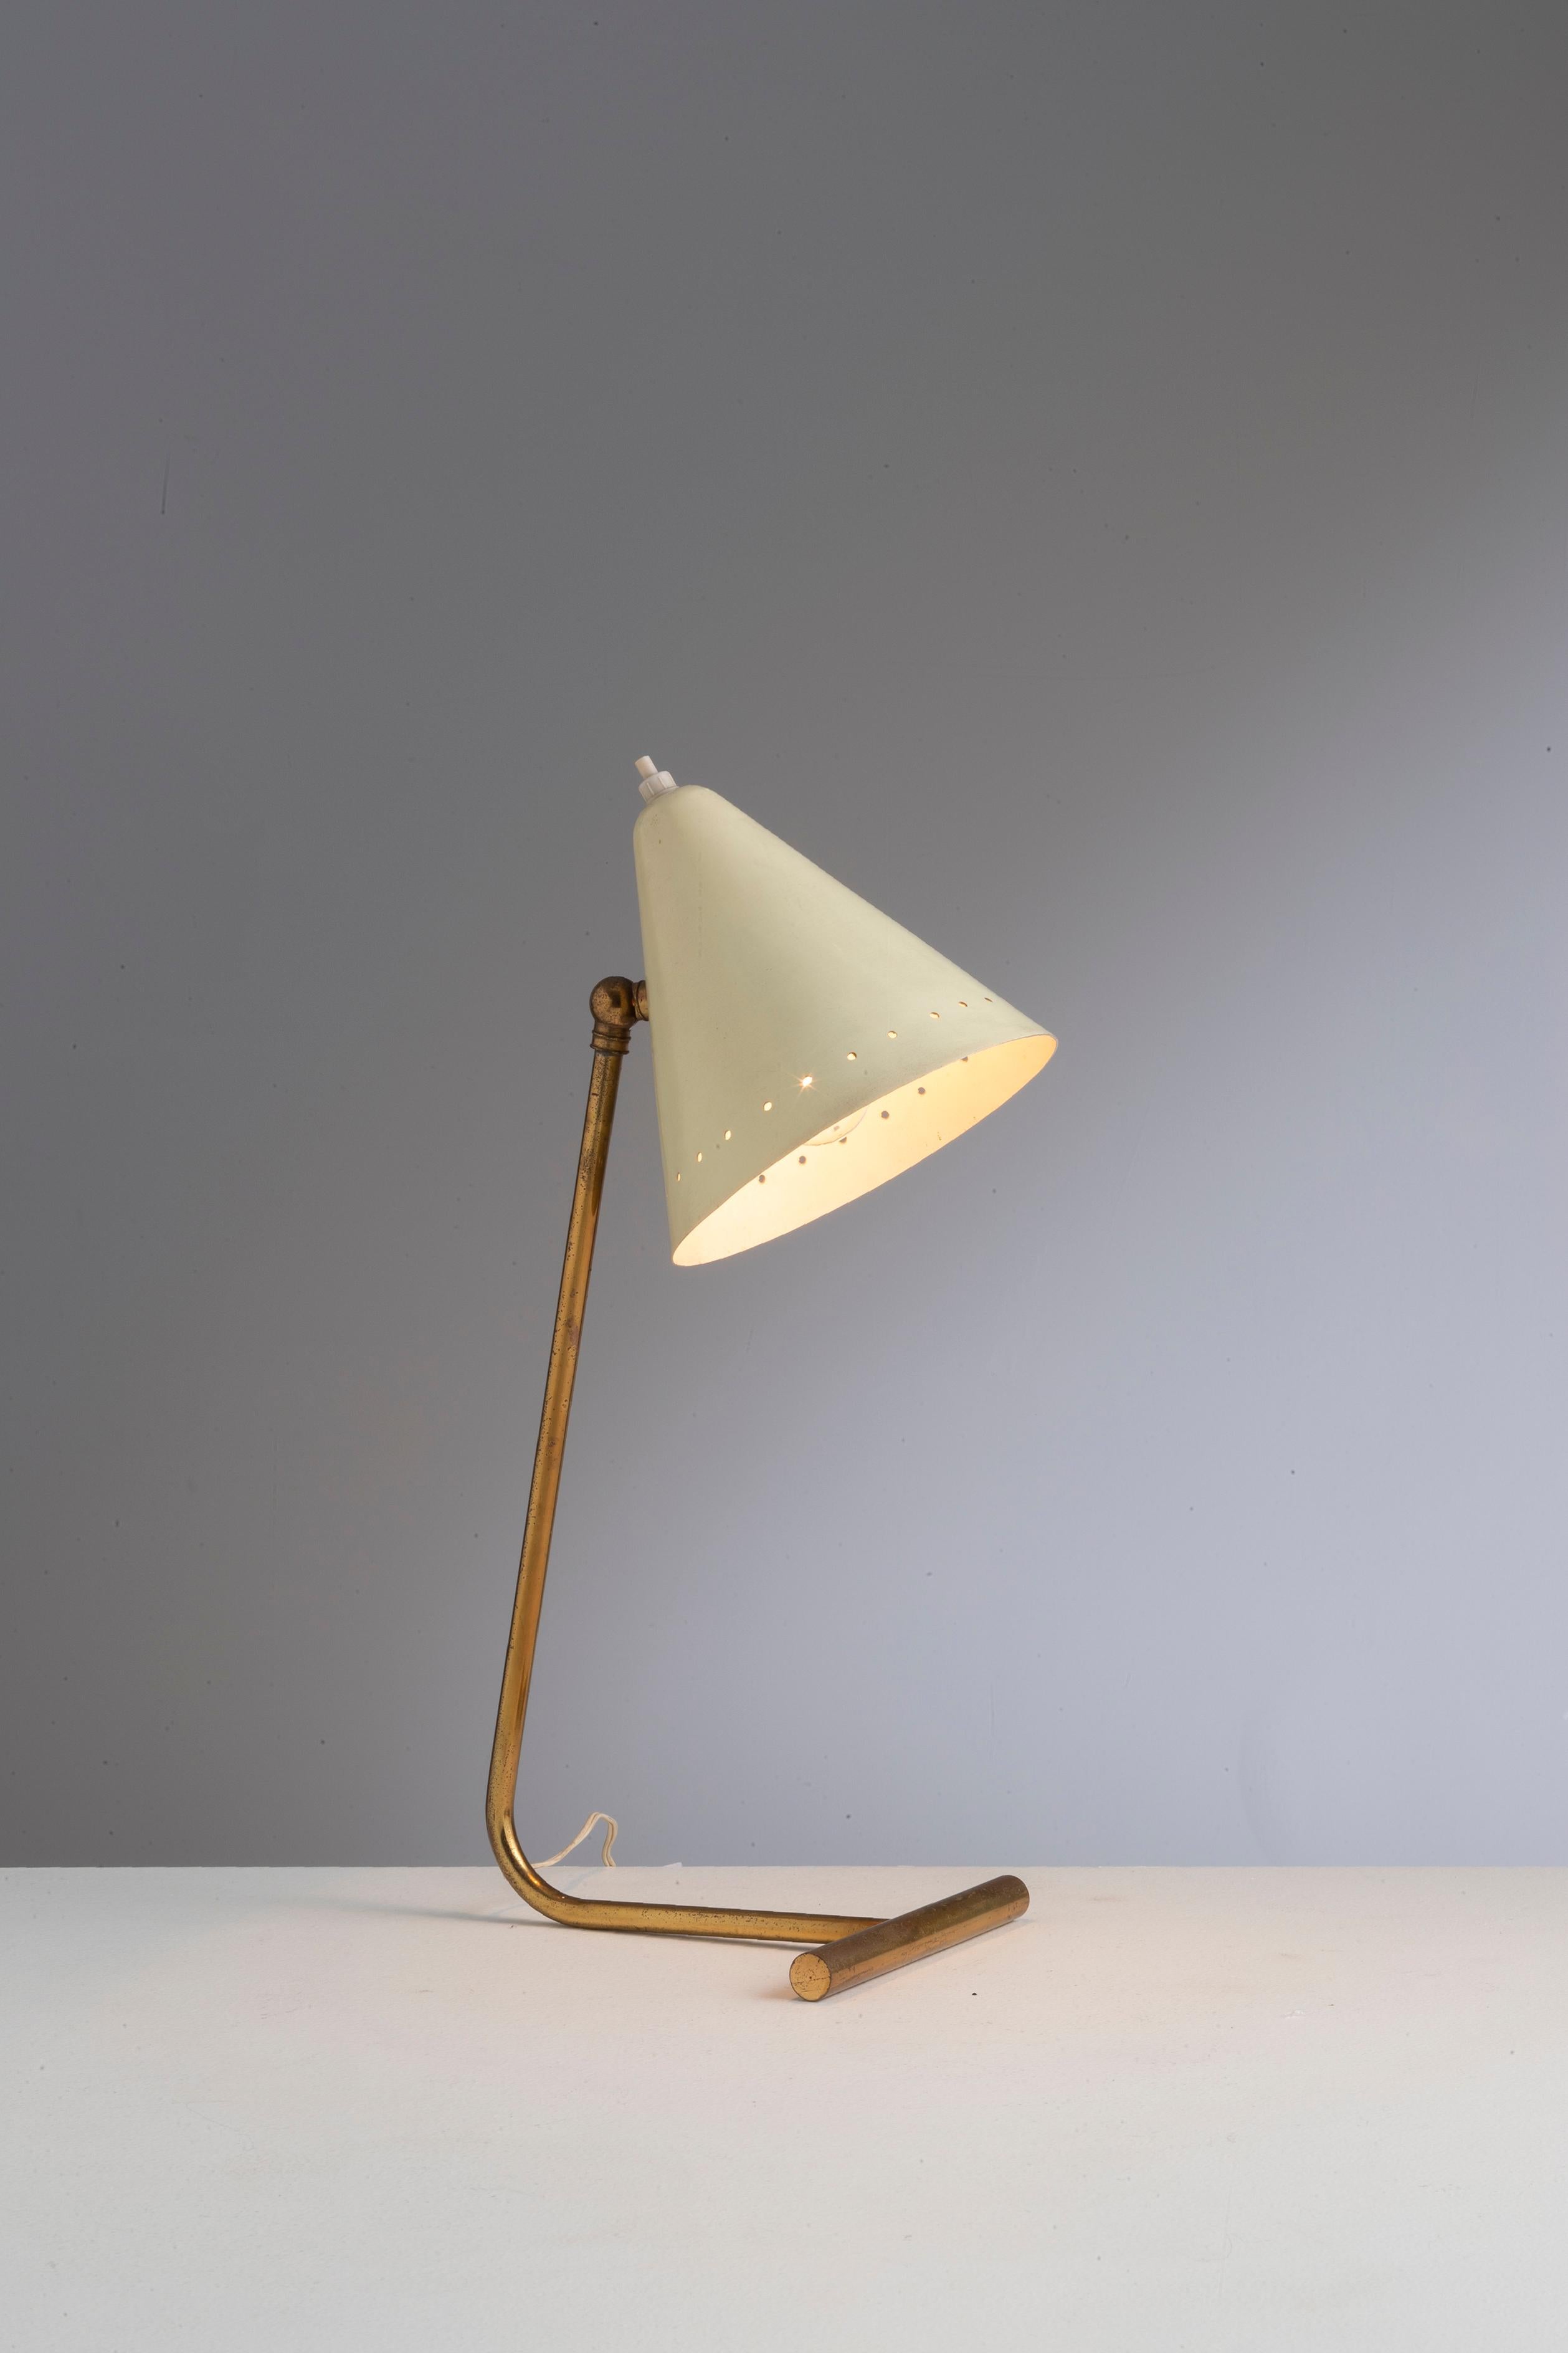 A desk Lamp by Gilardi & Barzaghi c.1955

Gilt tubular brass base and cream lacquered shade.

Condition: The original gilding has rubbed back to a lovely overall patina and the shade has been re-finished in cream lacquer. Re-wired and ready for